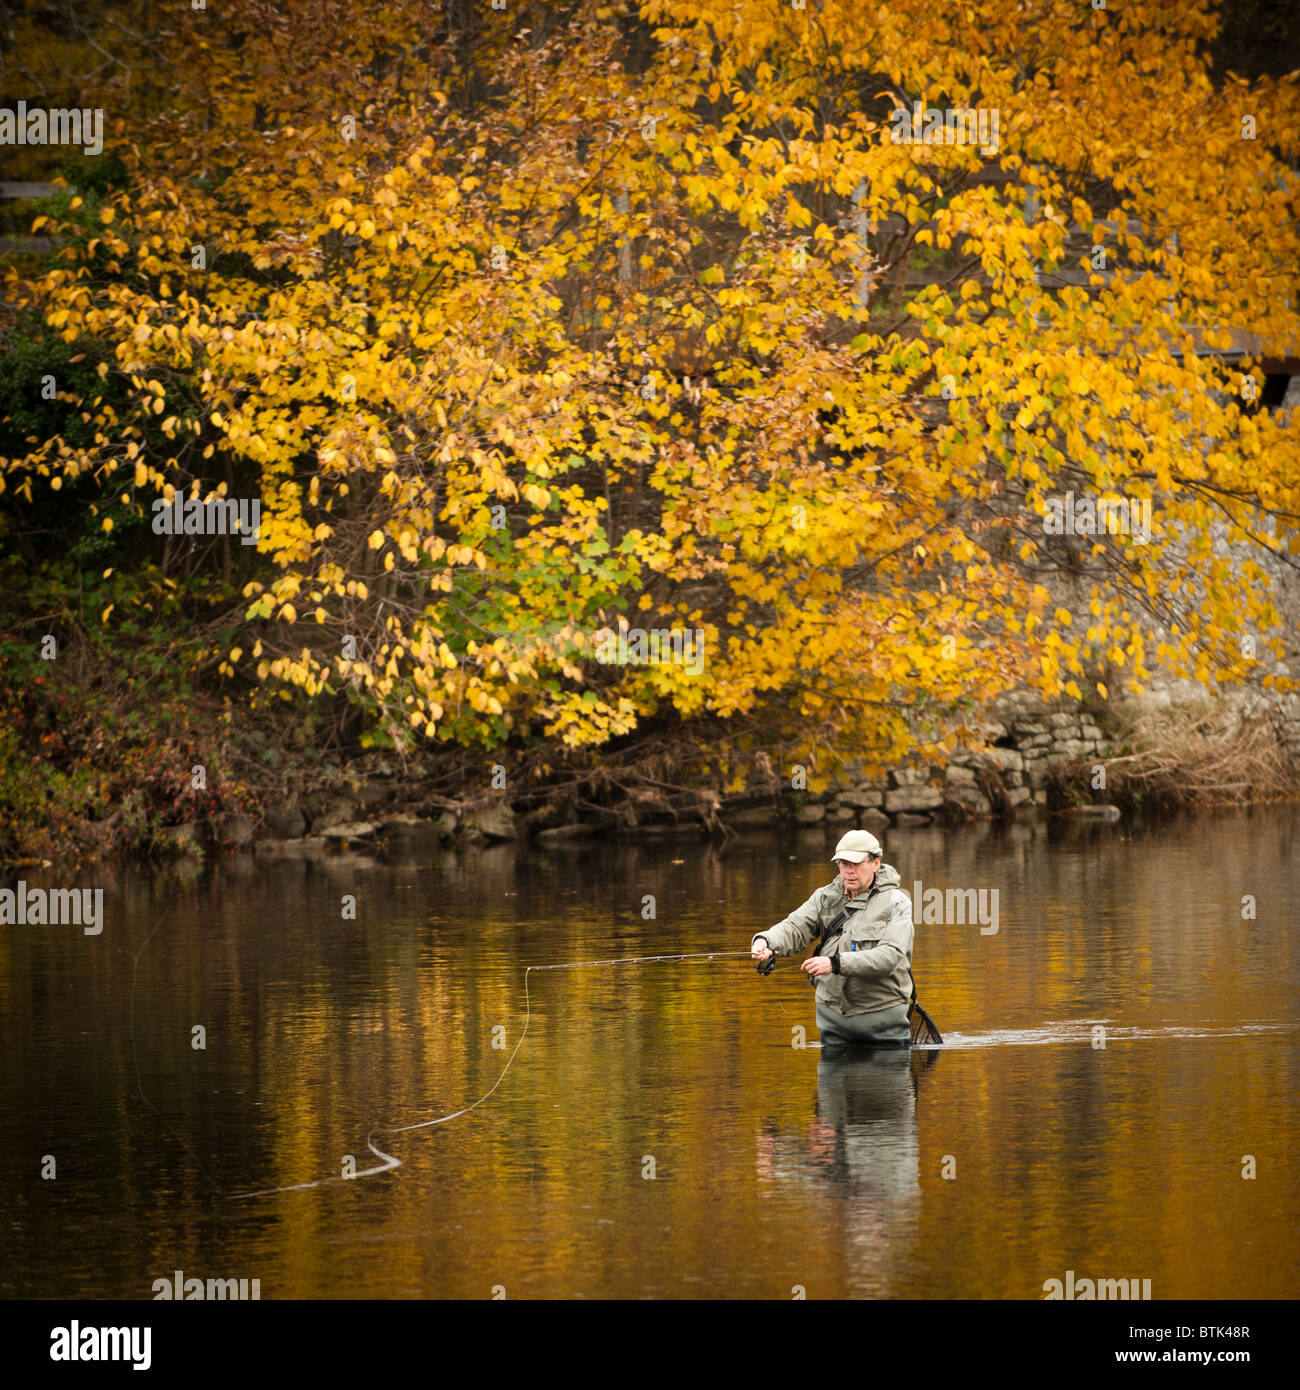 Autumn afternoon - a fisherman fly fishing for trout in the River Wye at Builth Wells , Powys Wales UK Stock Photo